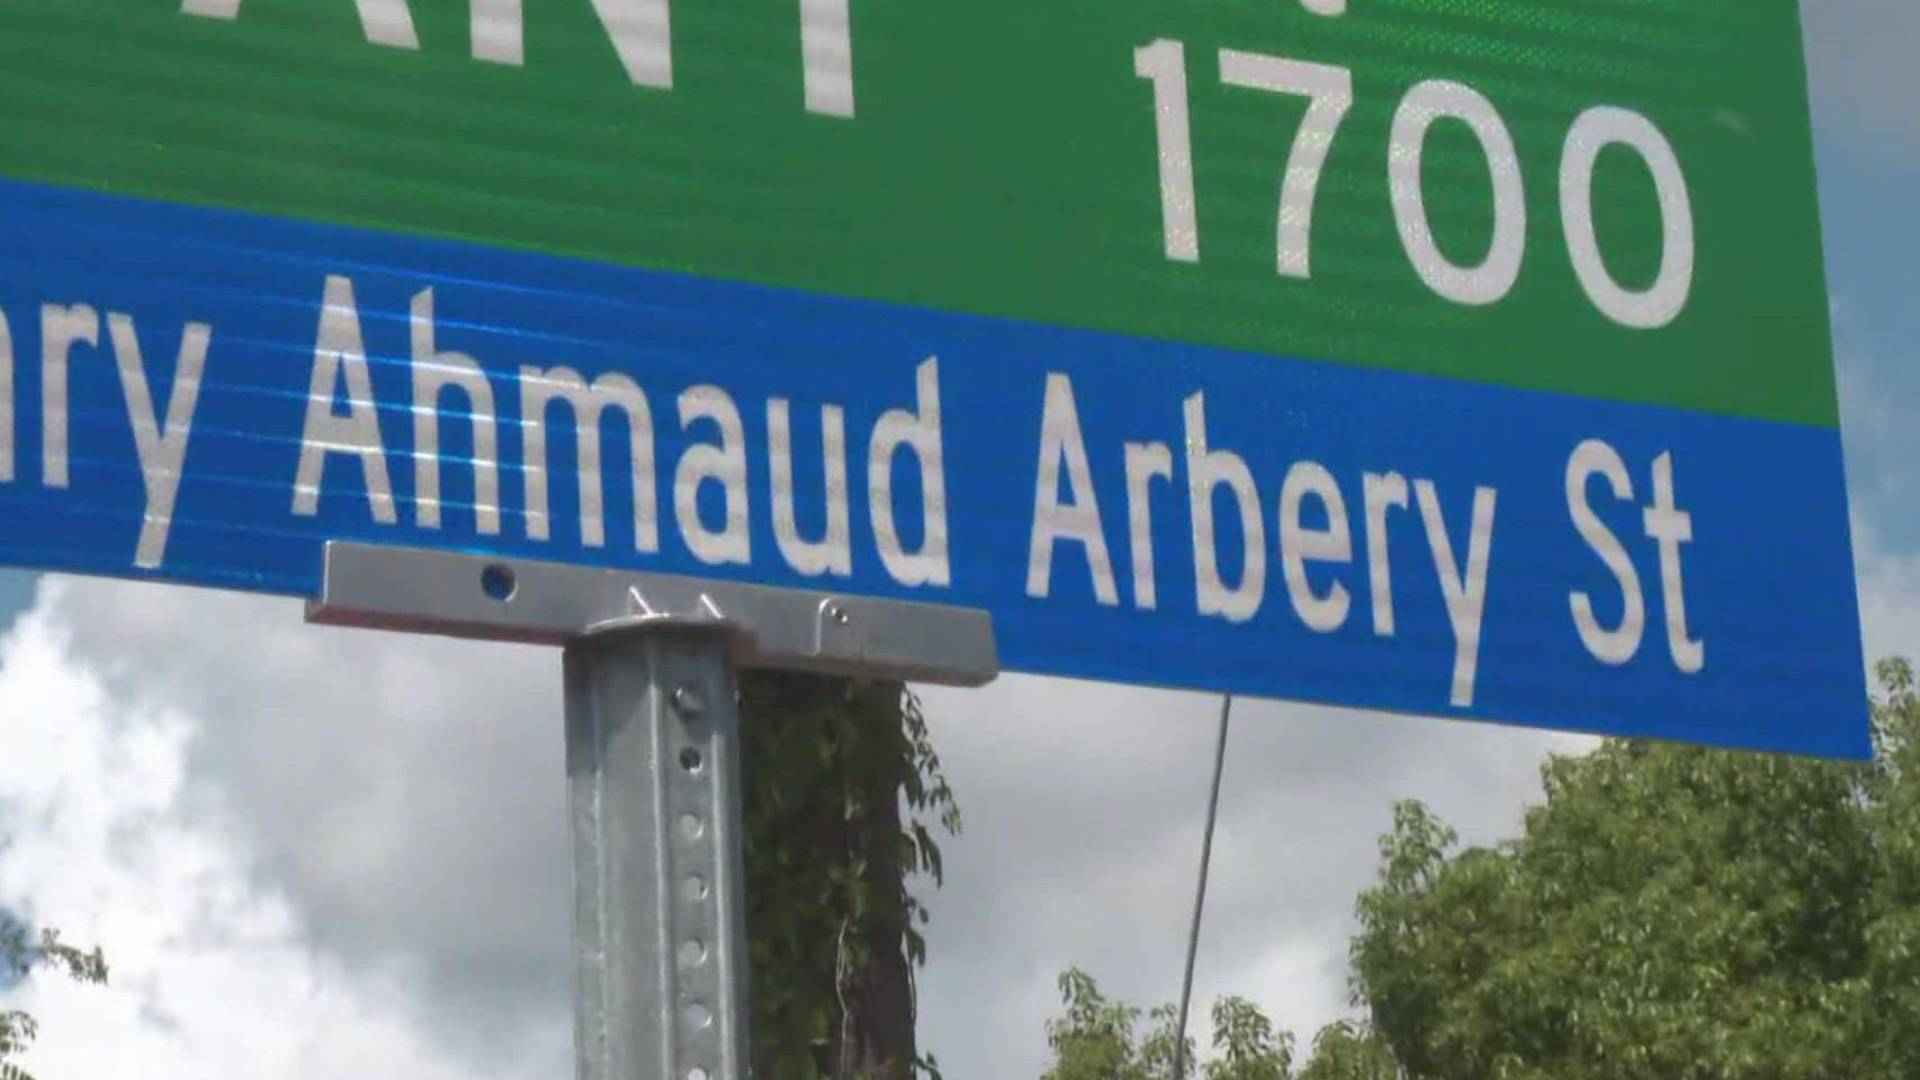 The street sign will commemorate Arbery's life. "Promise me you won't stop saying his name," his mother, Wanda Cooper-Jones, said at the unveiling.